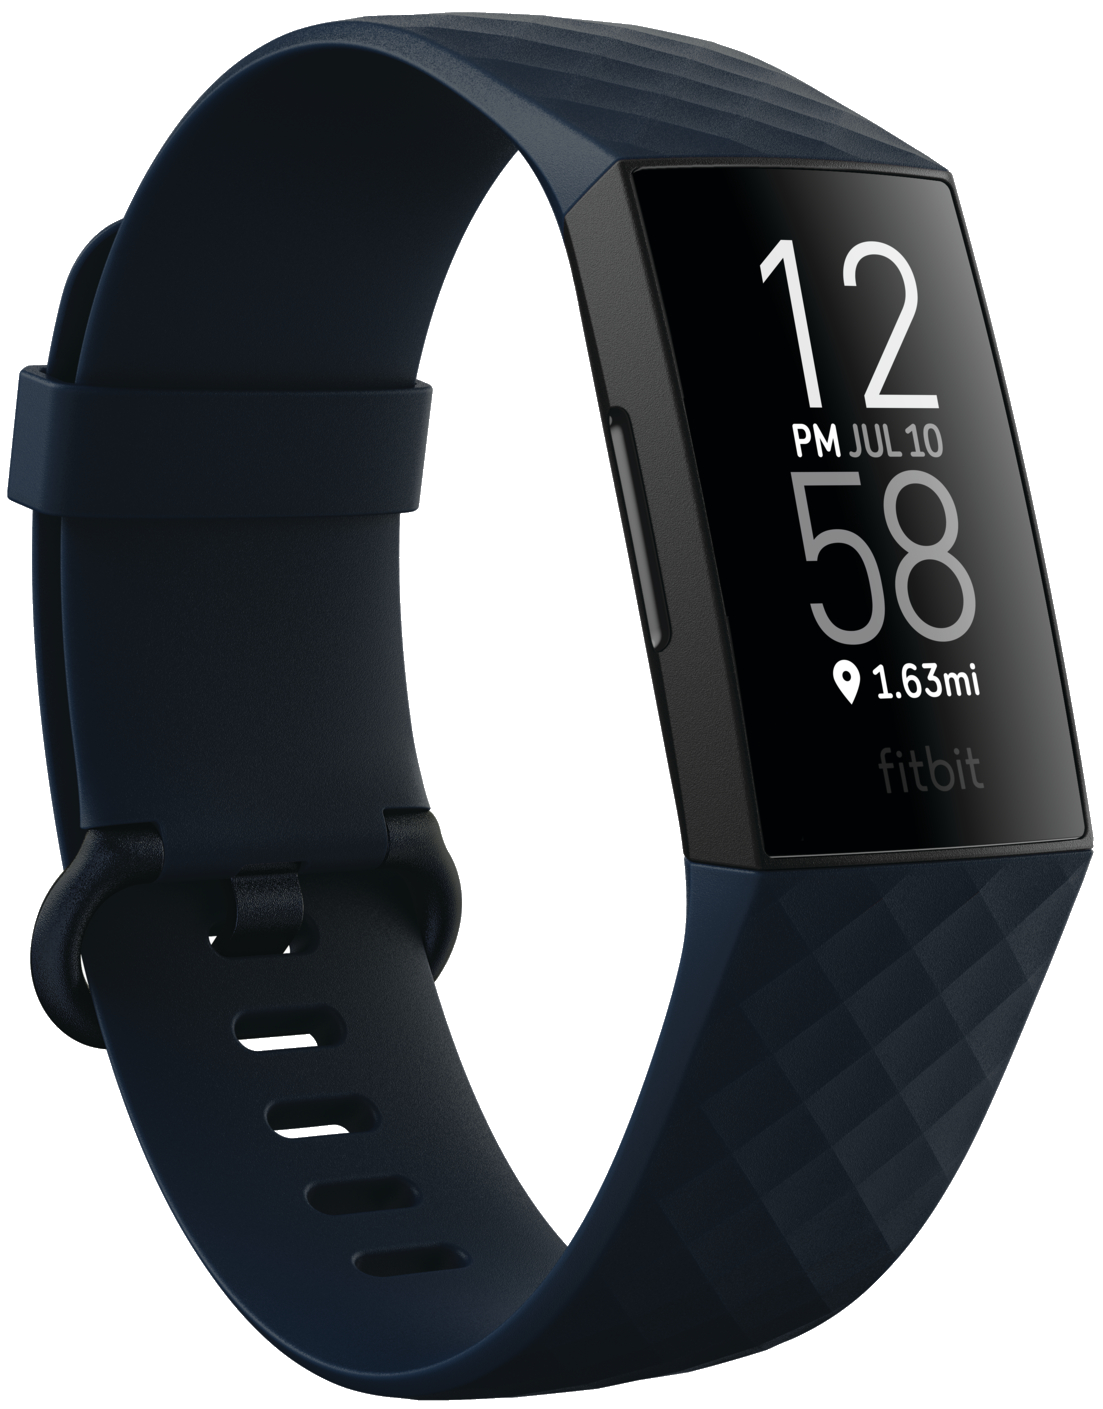 https://www.androidcentral.com/sites/androidcentral.com/files/article_images/2020/03/fitbit-charge-4-navy-cropped.png?itok=OzDrjAAW